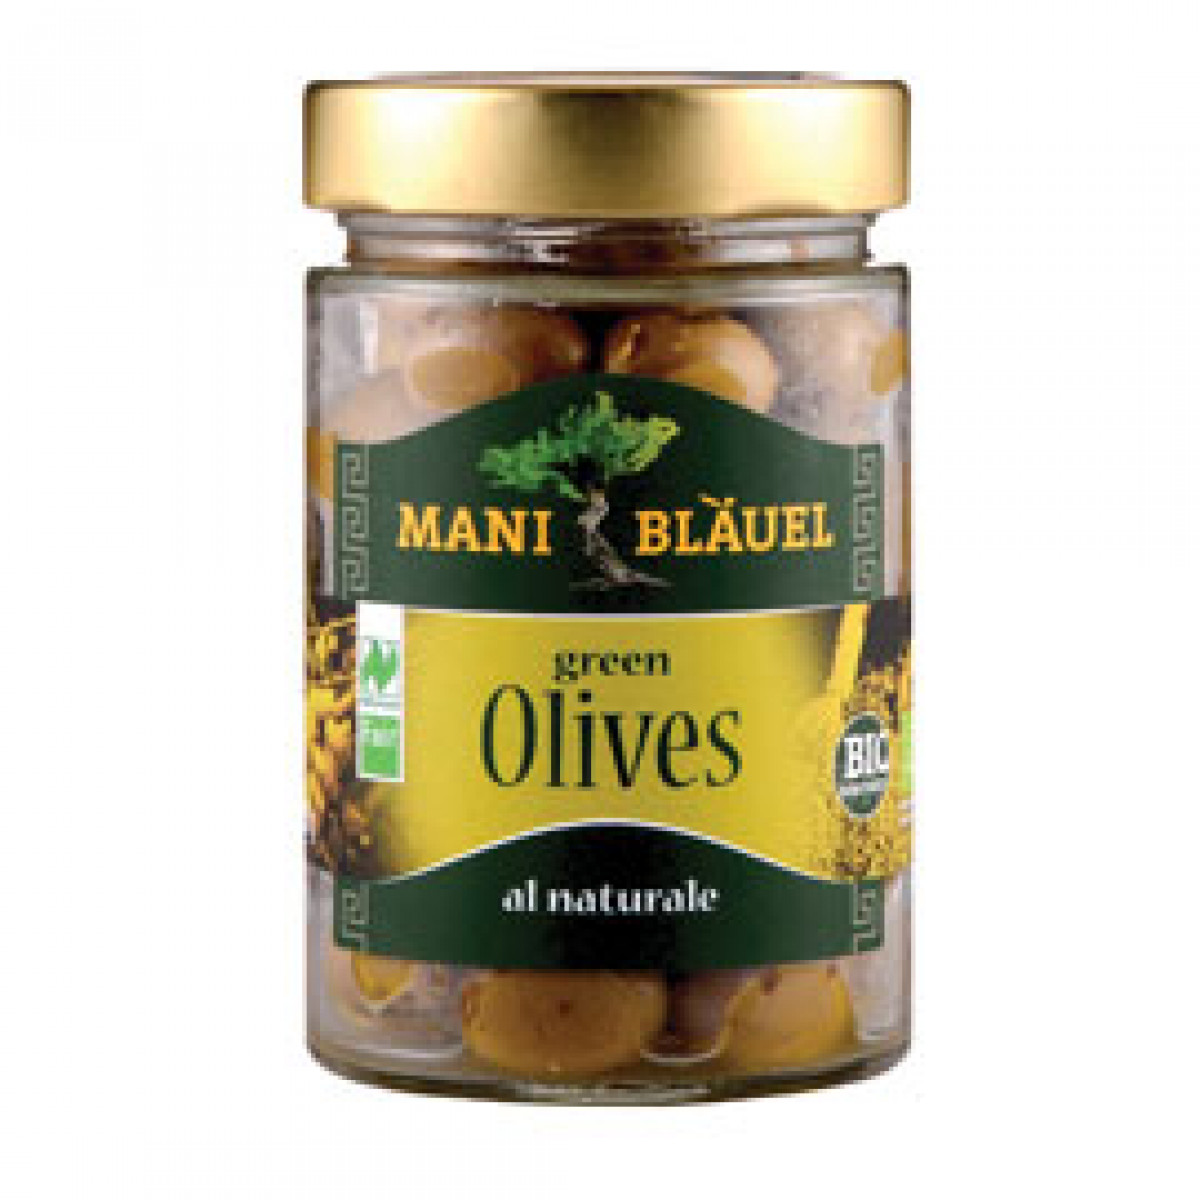 Product picture for Green Olives al Naturale